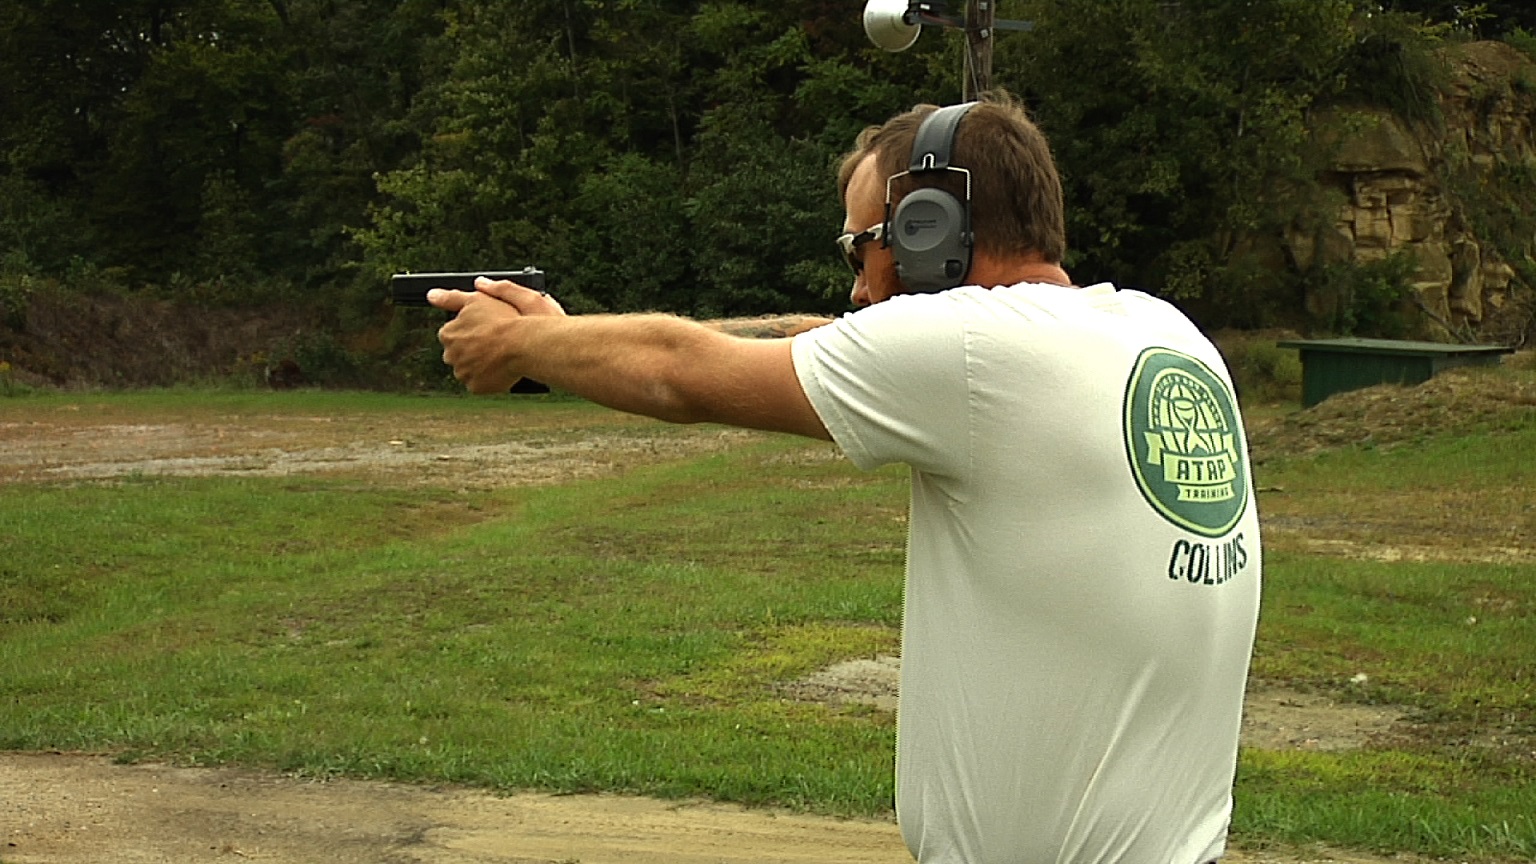 Part 1 | Pistol Shooting Drills: The Rhythm Drill product featured image thumbnail.